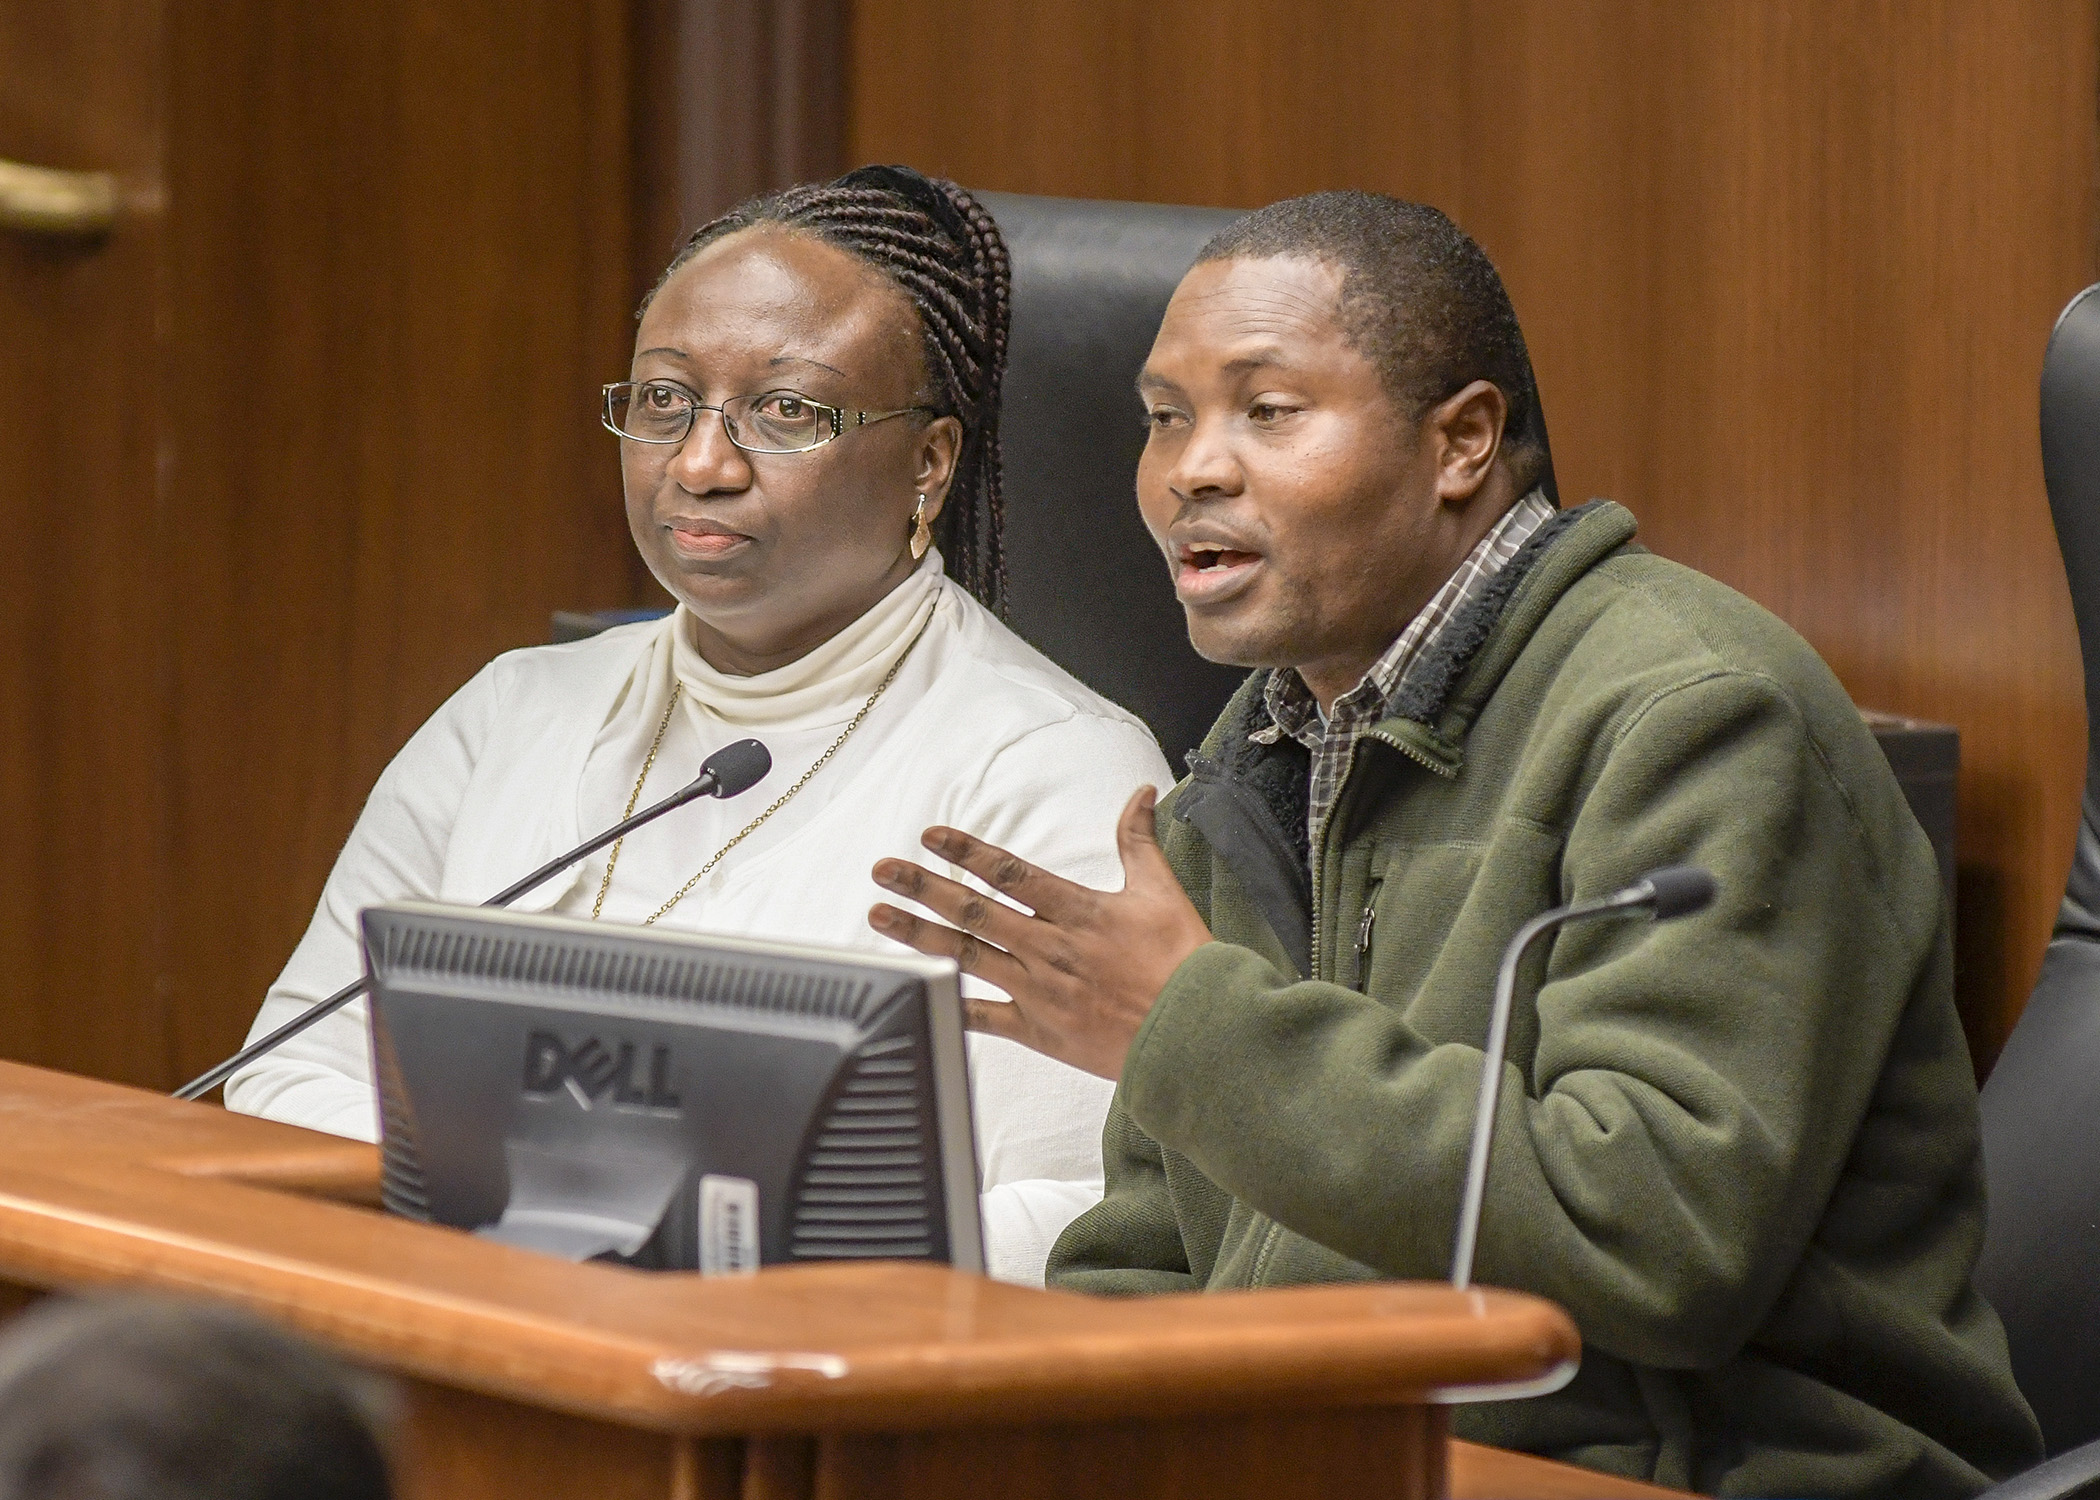 Daniel Onyancha and Marie Denise Uwizera testify before the House Jobs and Economic Development Finance Division Feb. 12 in support of a bill that would provide funding for new American workforce training. Photo by Andrew VonBank